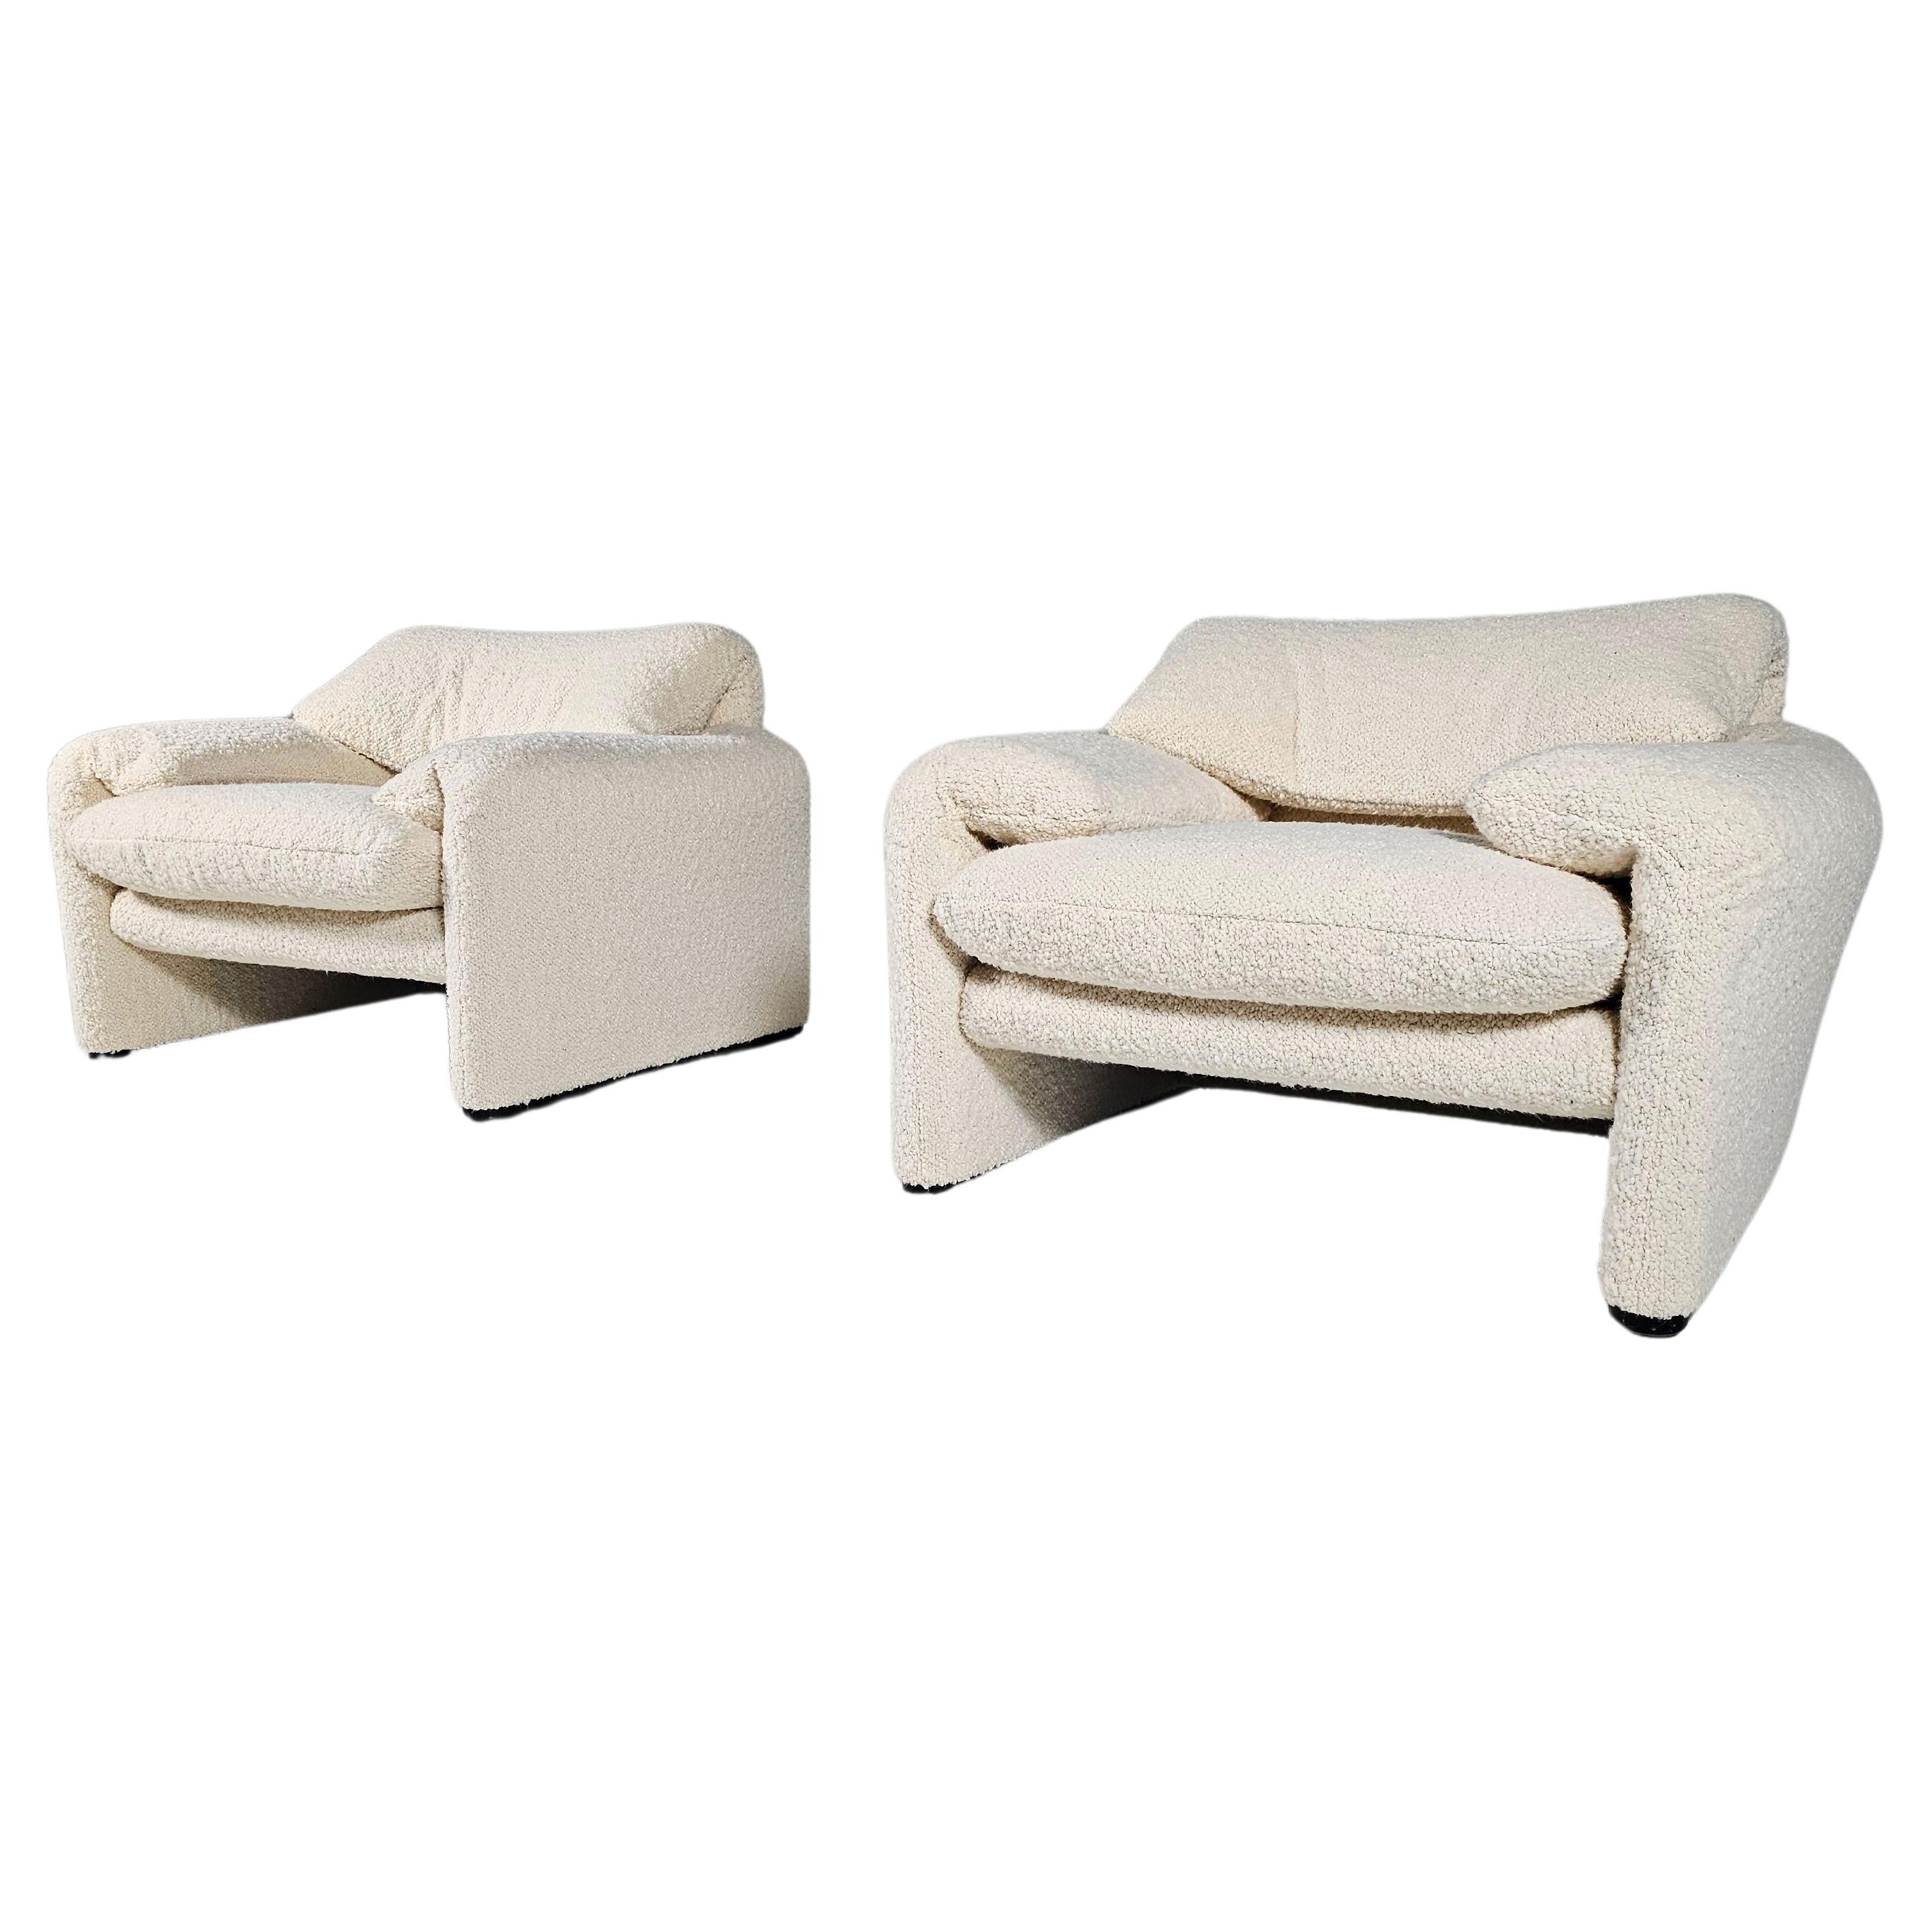 Maralunga Chairs in cream boucle by Vico Magistretti for Cassina, 1970s